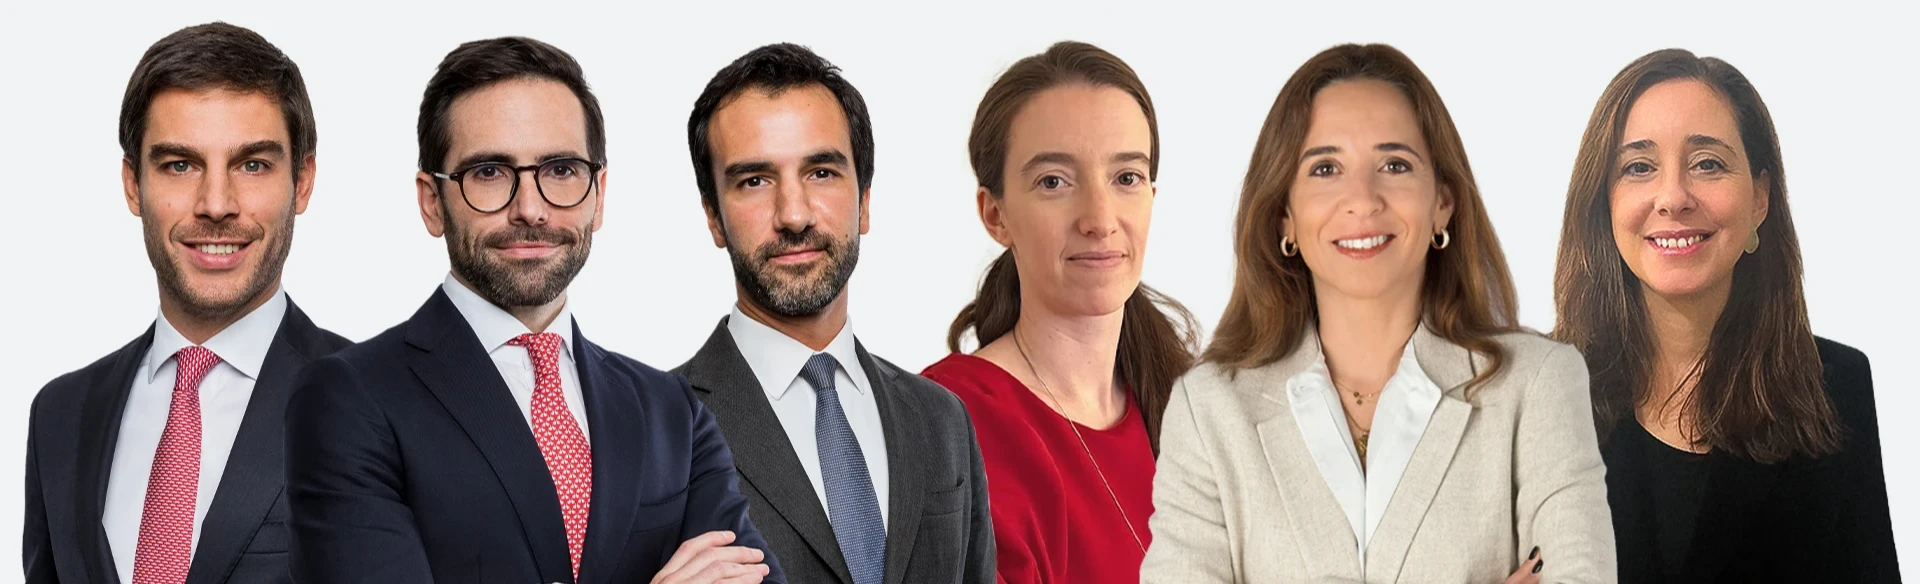 Pérez-Llorca launches operations in Lisbon, hiring six new partners and a counsel for the new office